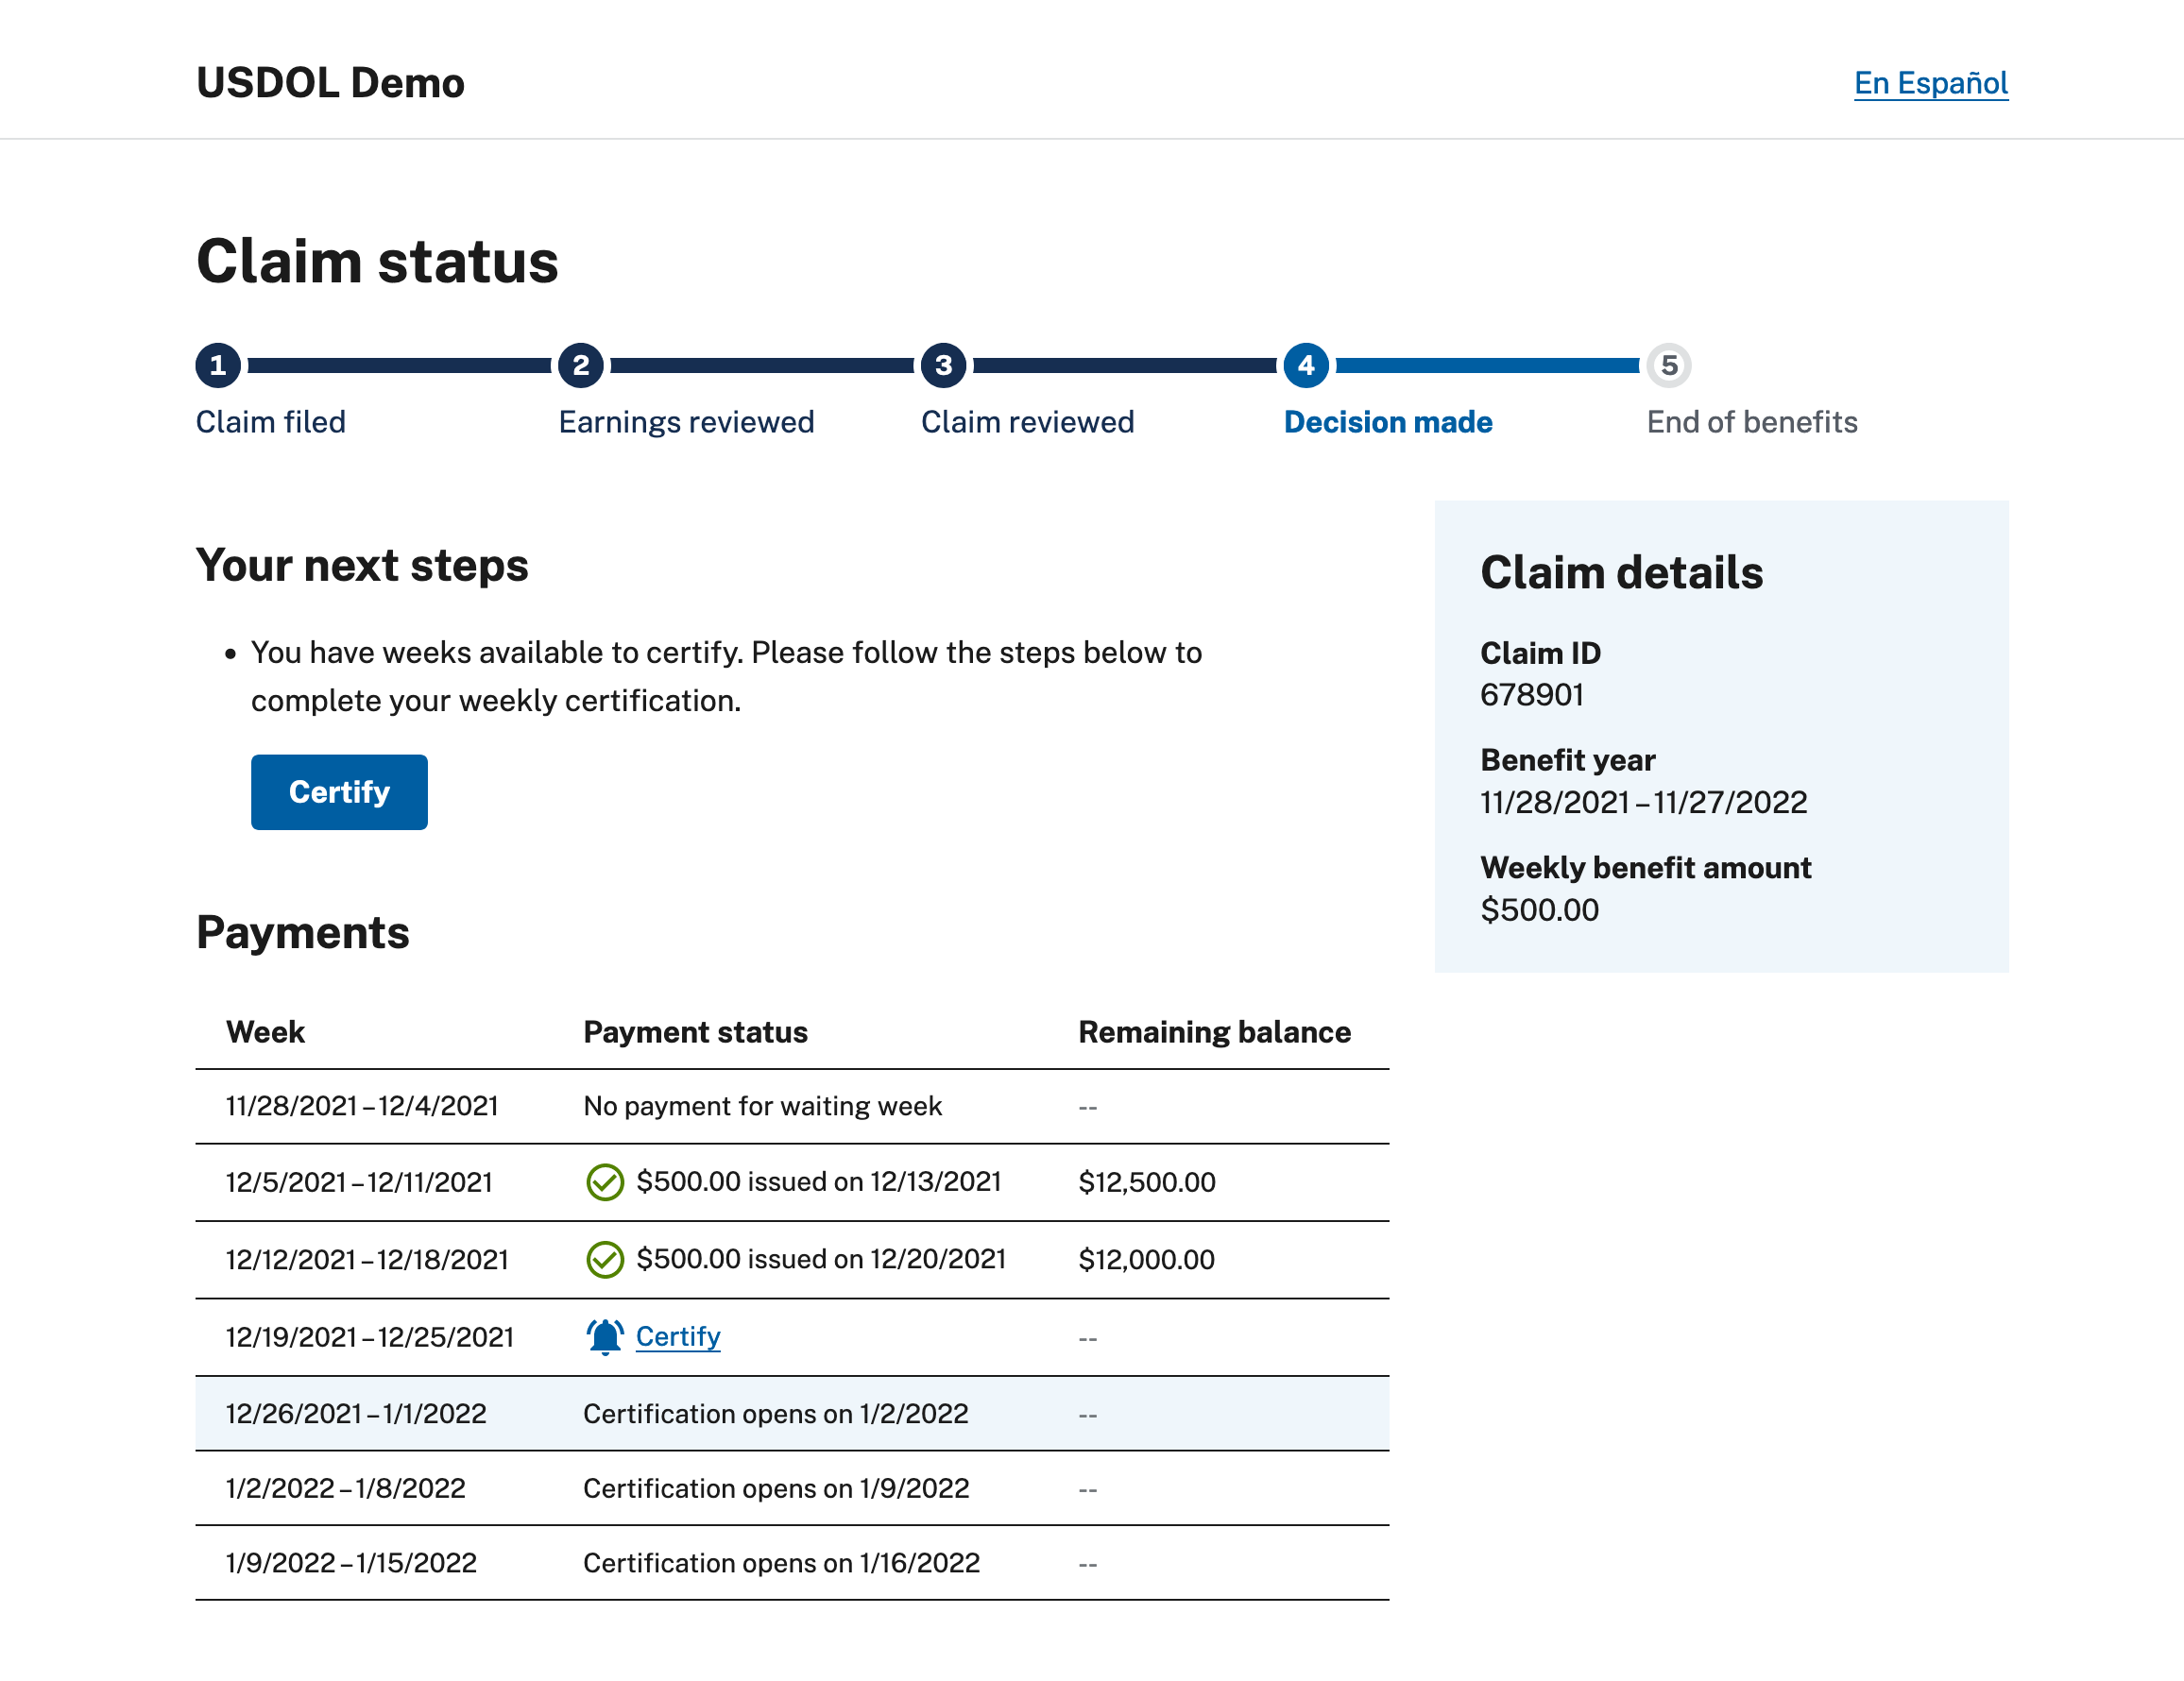 Screenshot of example claims status page in English